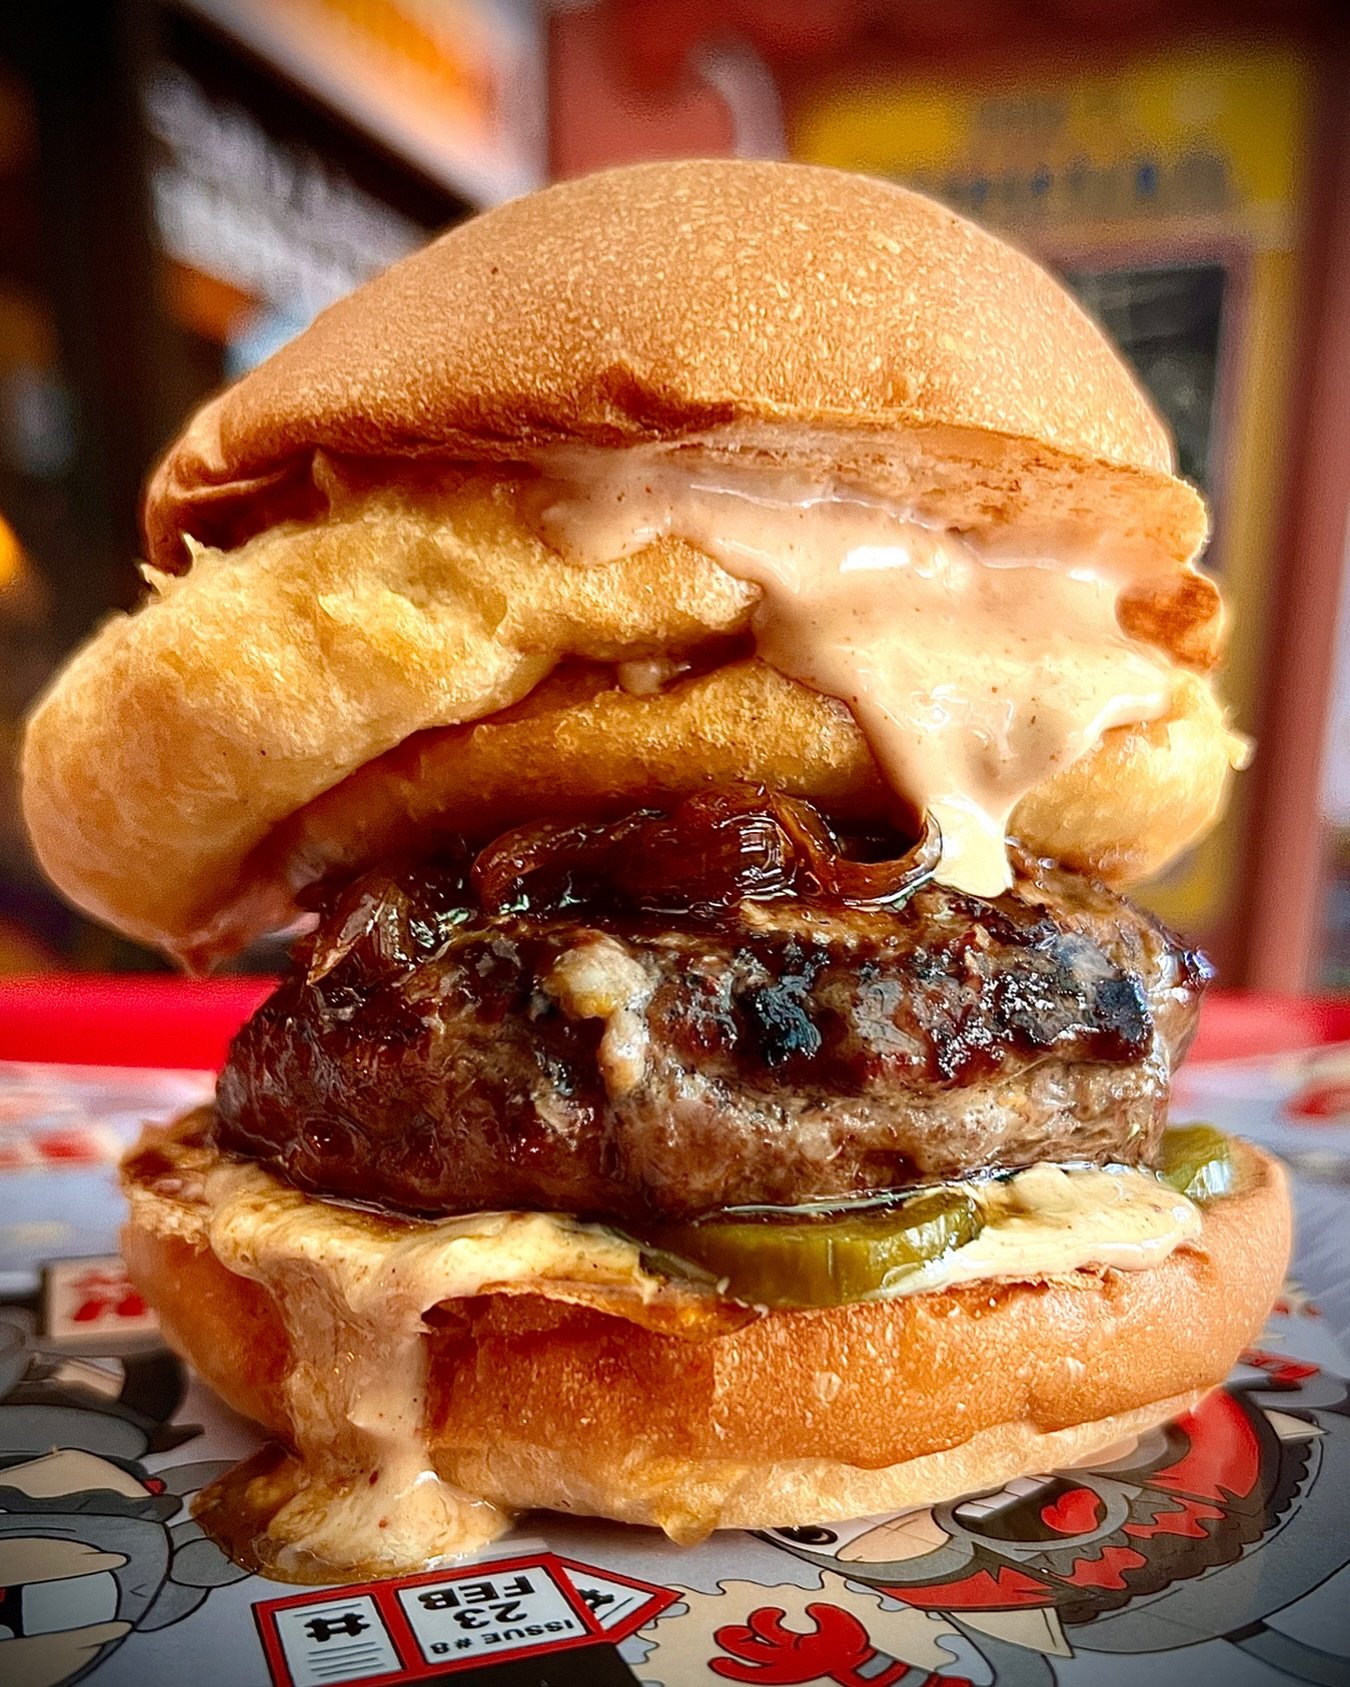 GOT MORE ZINGGG THAN THAA KINGGG!!!!🔥🔥🔥

👑🇬🇧 THE ROYAL TWAT 🇬🇧👑
- English Cheddar Stuffed Wagyu Beef Patty
- Lager Battered Onion Rings
- Caramelised Onions
- House Made Jumbo Pickles
- Royal Burger Sauce

DON&rsquo;T LIVE WITH REGRET &mdash